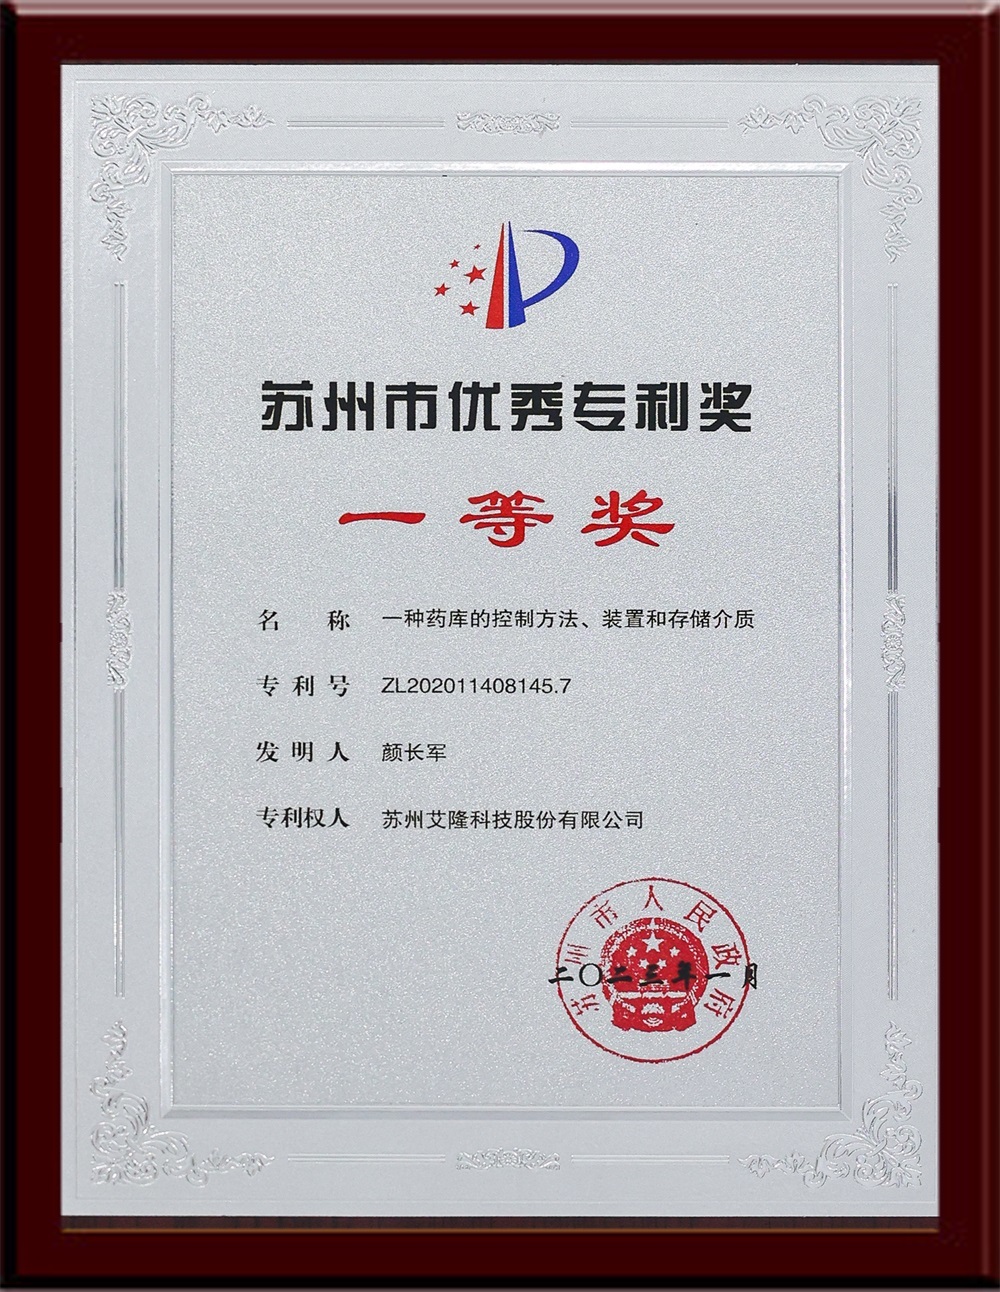 First Prize of Suzhou City Excellent Patent Award